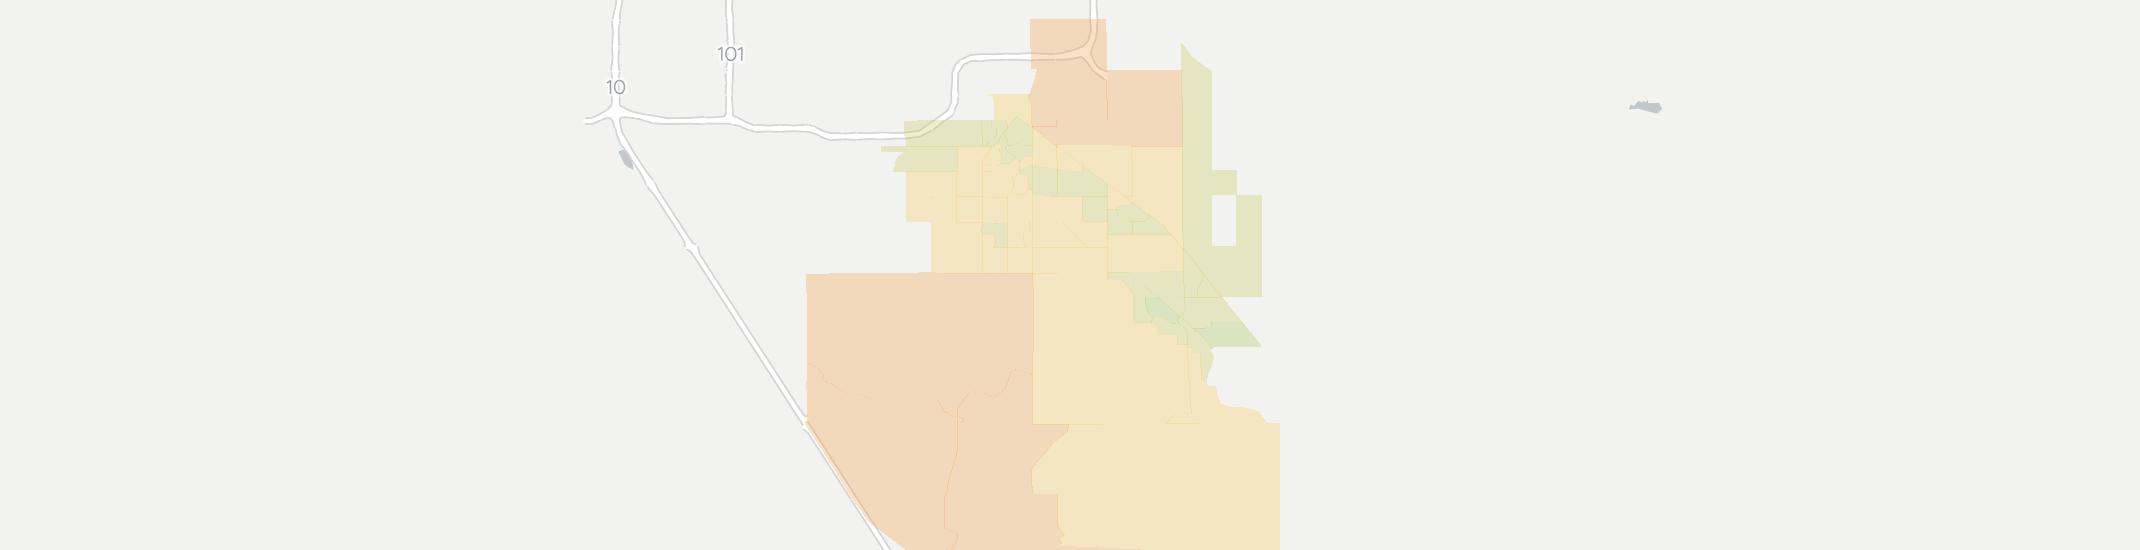 Queen Creek Internet Competition Map. Click for interactive map